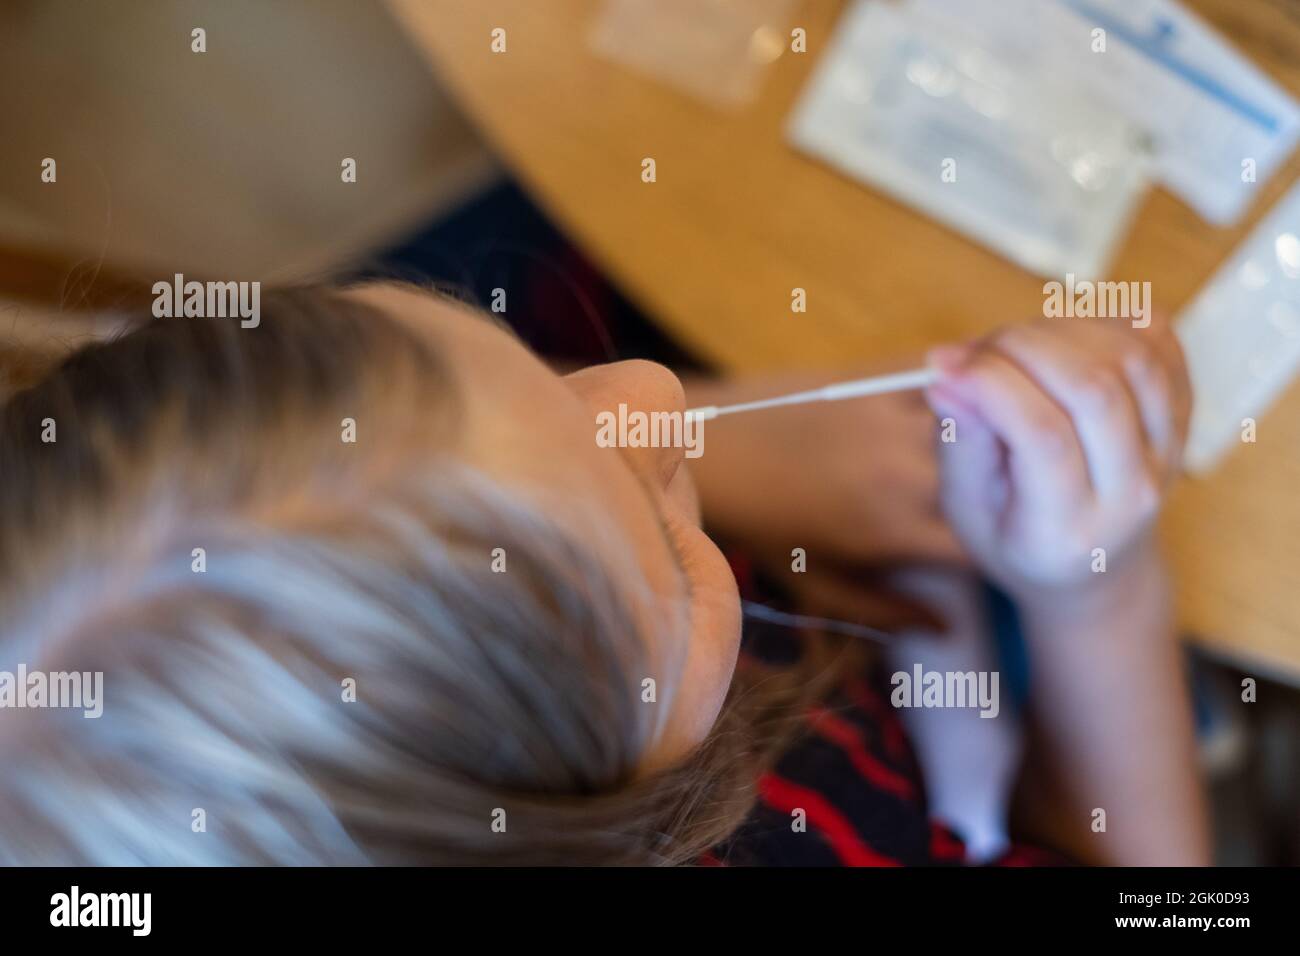 COVID-19 Ag Test kit for self-testing. Child testing herself for coronavirus at home. Stock Photo